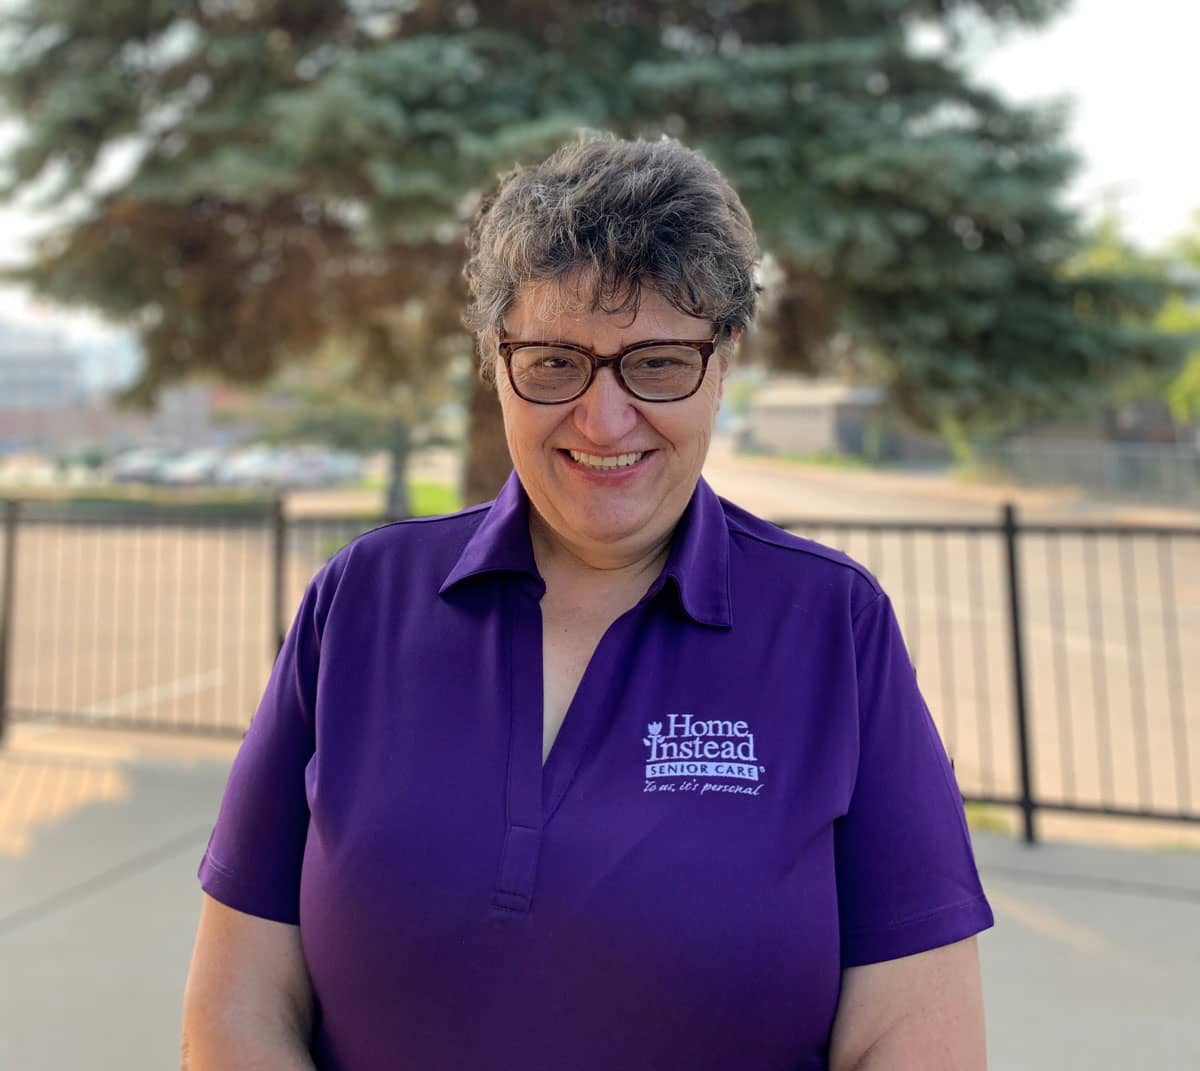 Mary-Lynn is our September 2022 Care Professional of the Month for Home Instead Saskatoon.